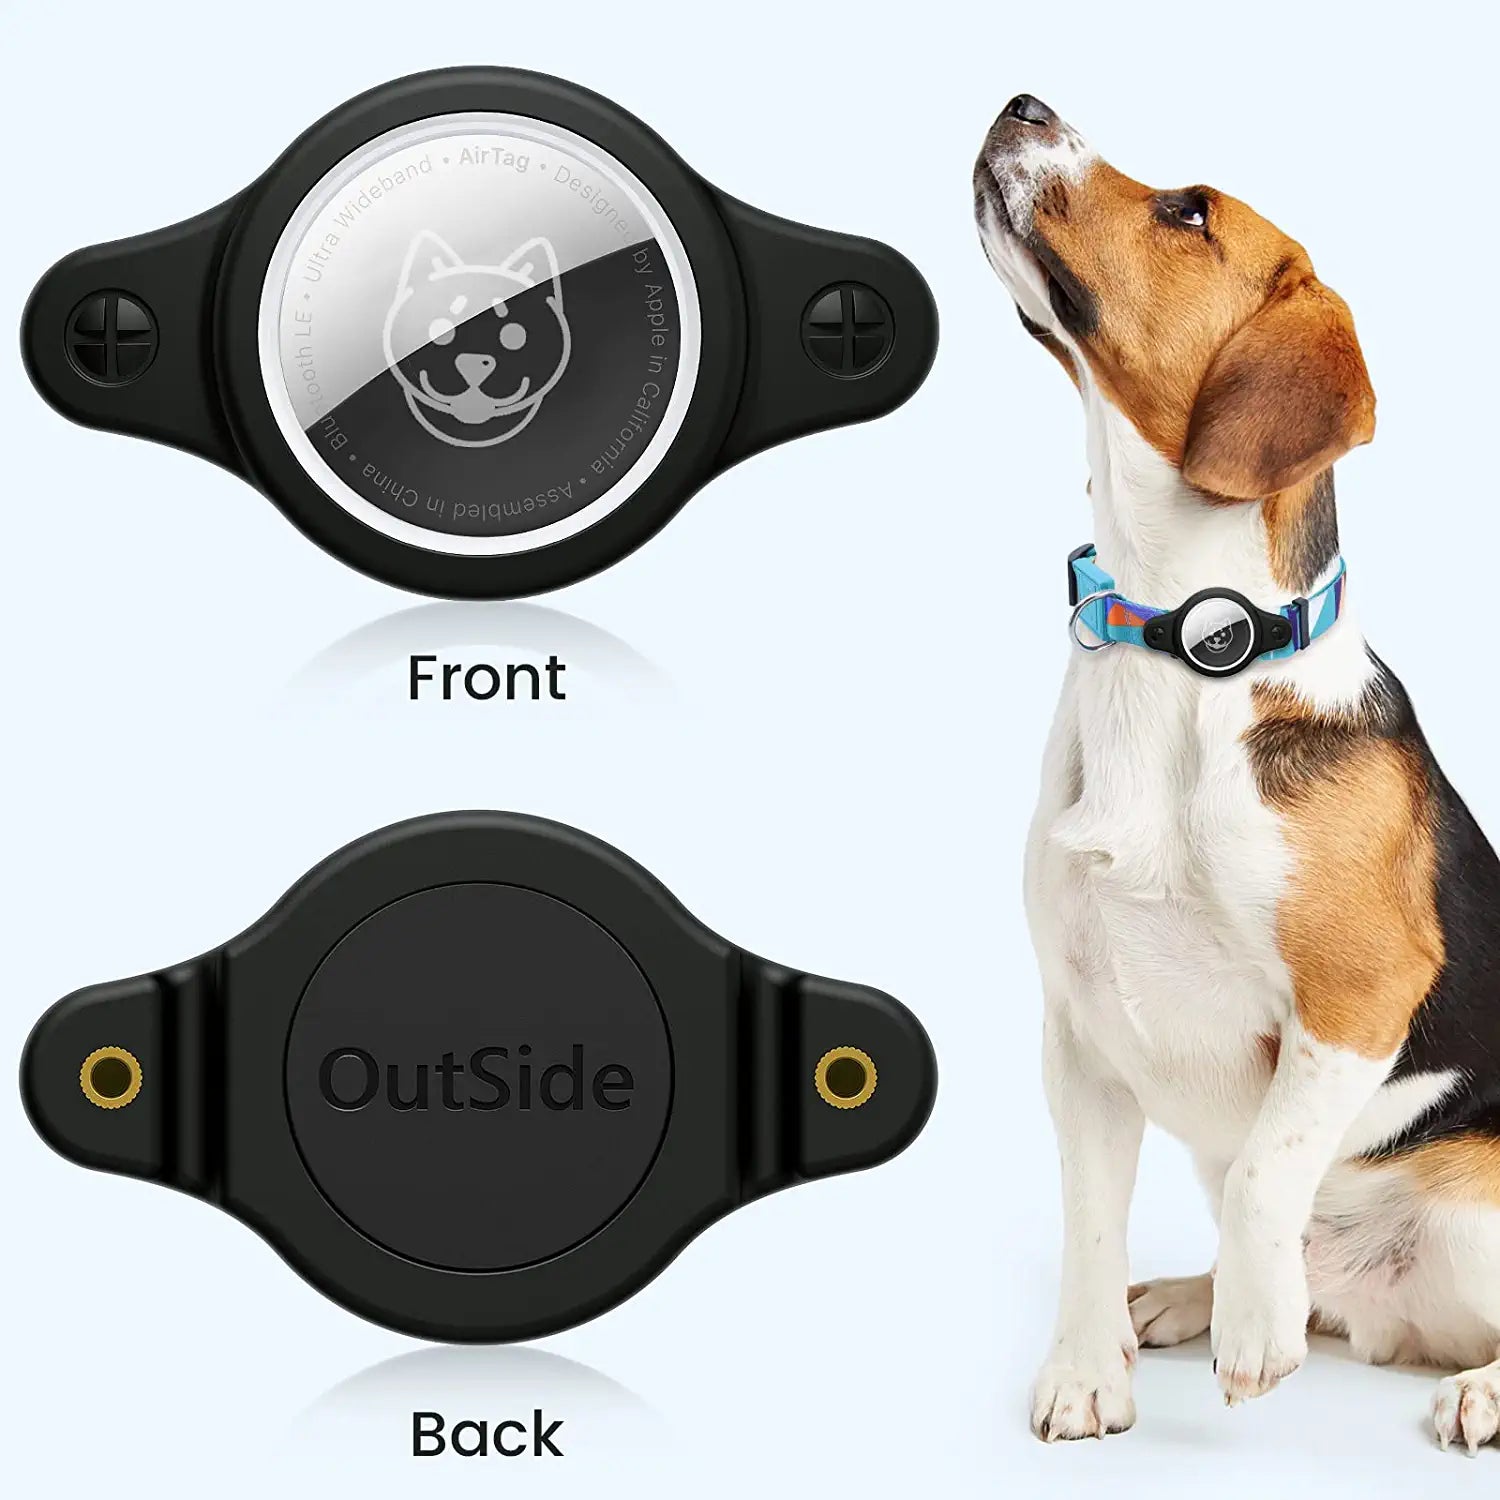 Airtag Holder for Dog Collar, Airtag Dog Collar Holder Compatible with Apple Airtags, Waterproof Airtag Case for Dogs, Anti-Lost Airtag Case Fits All Width Collars